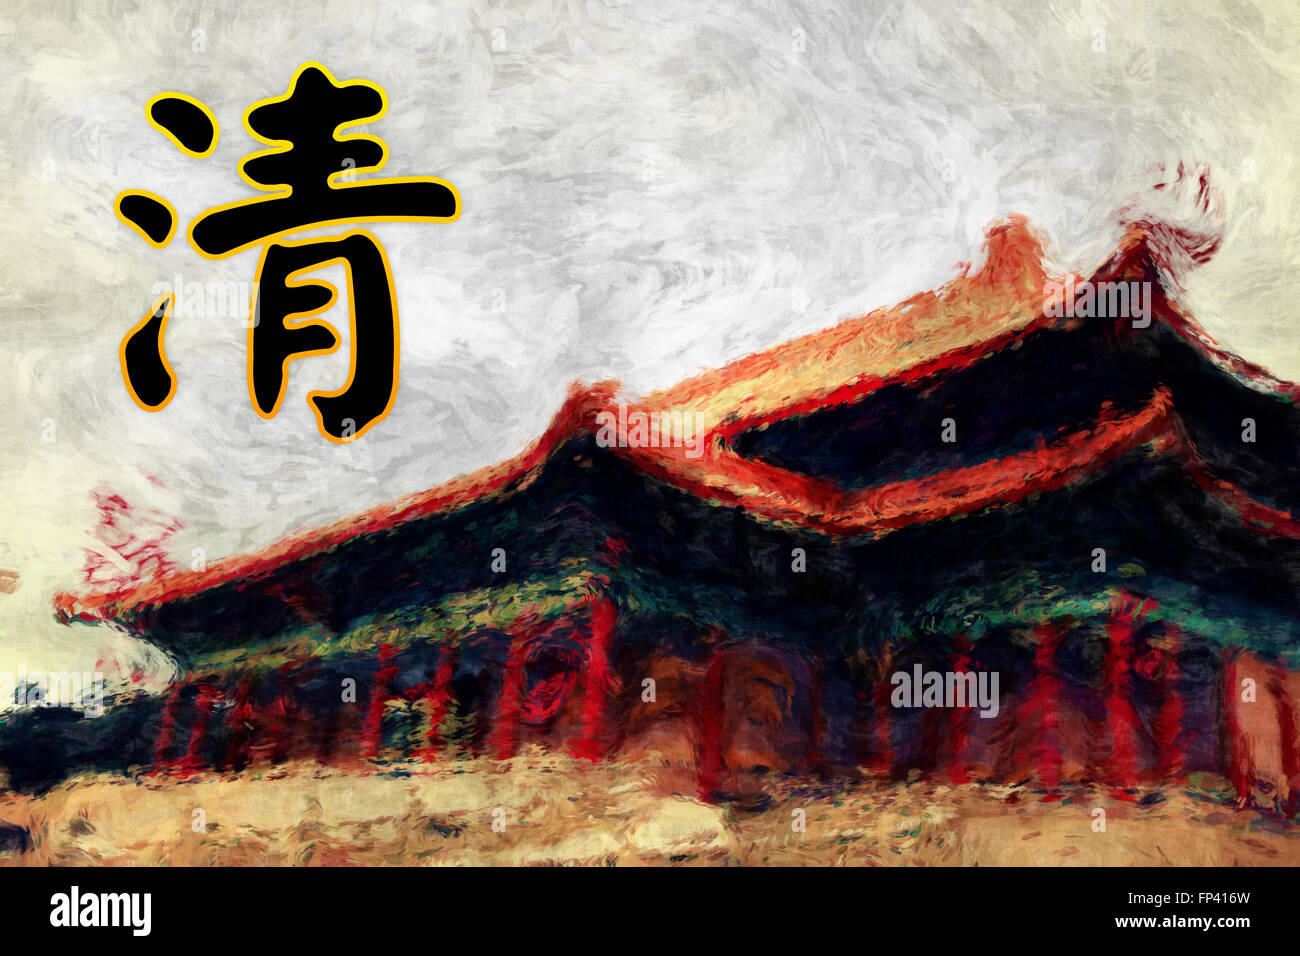 Clarity Calligraphy Artwork in Feng Shui and Chinese Culture Stock Photo